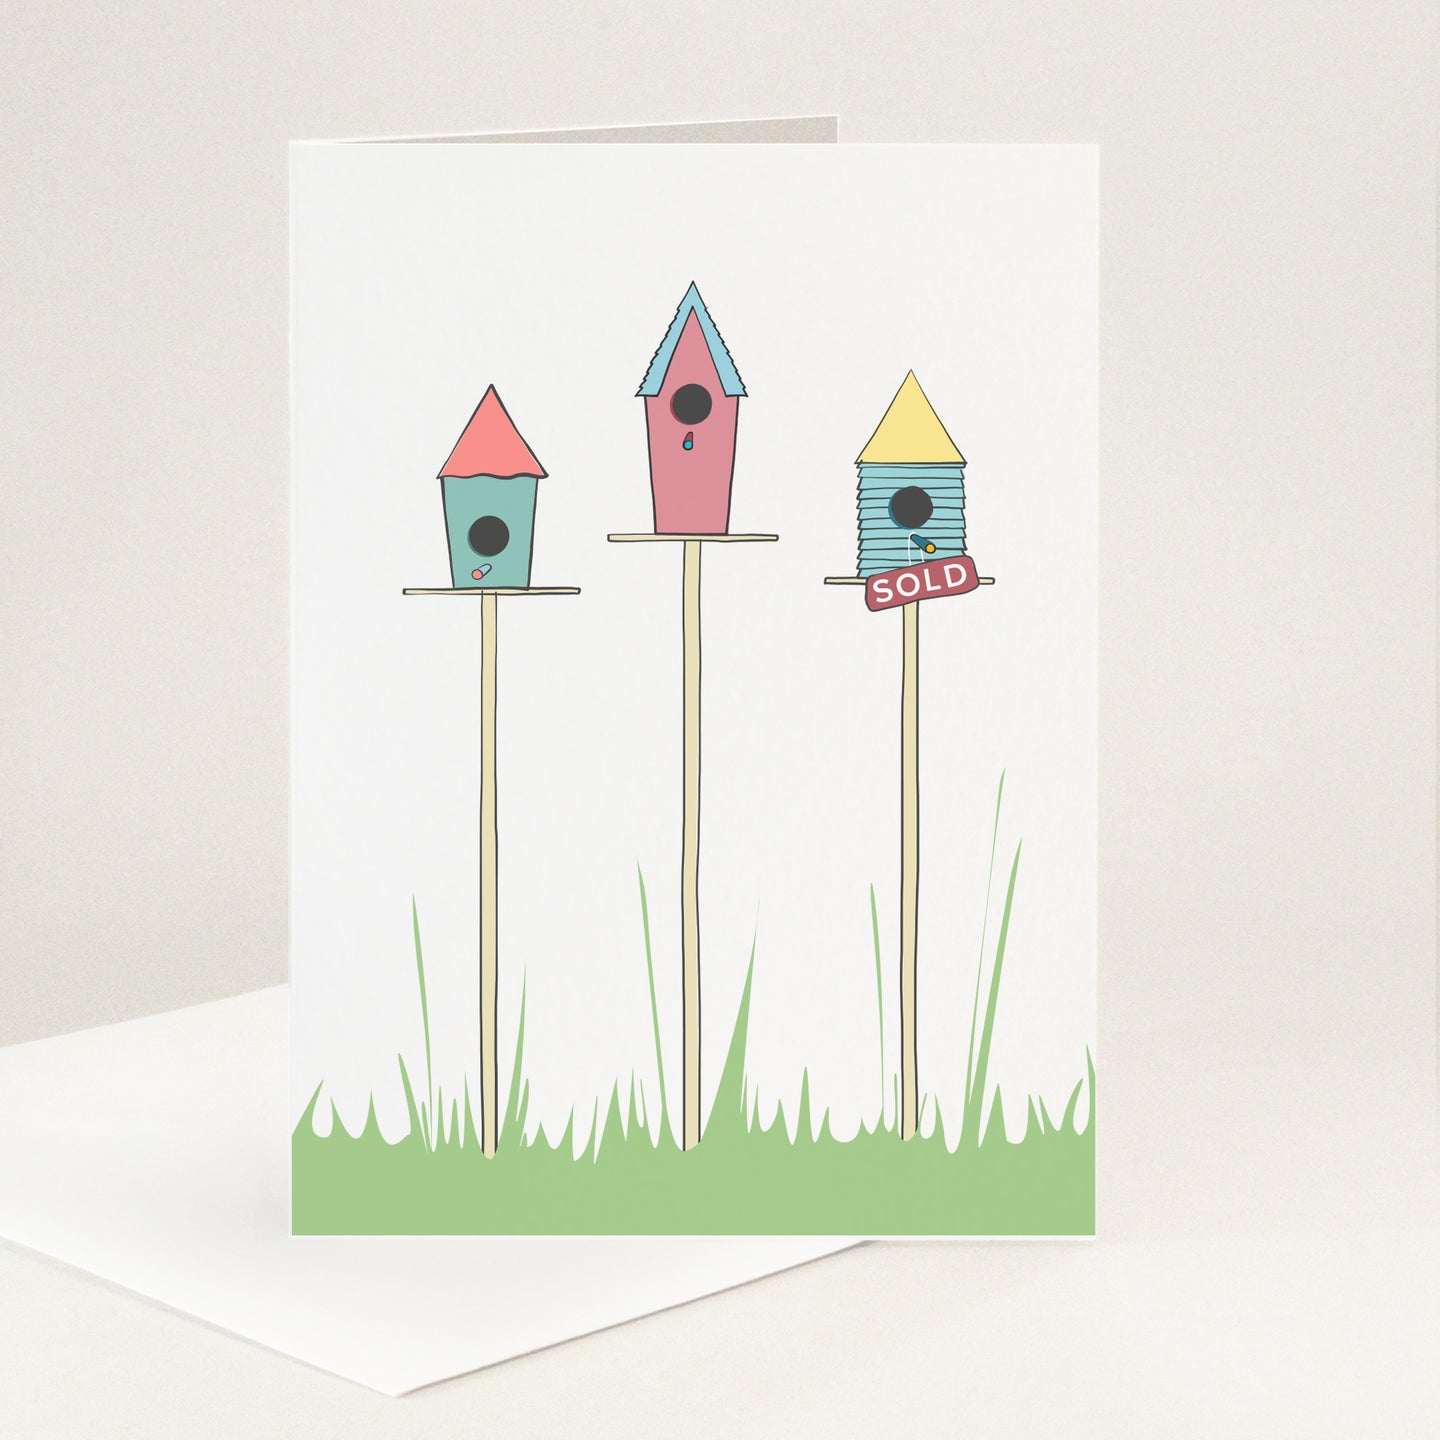 Three colourful birdhouses on poles with one having a sold sign on it.